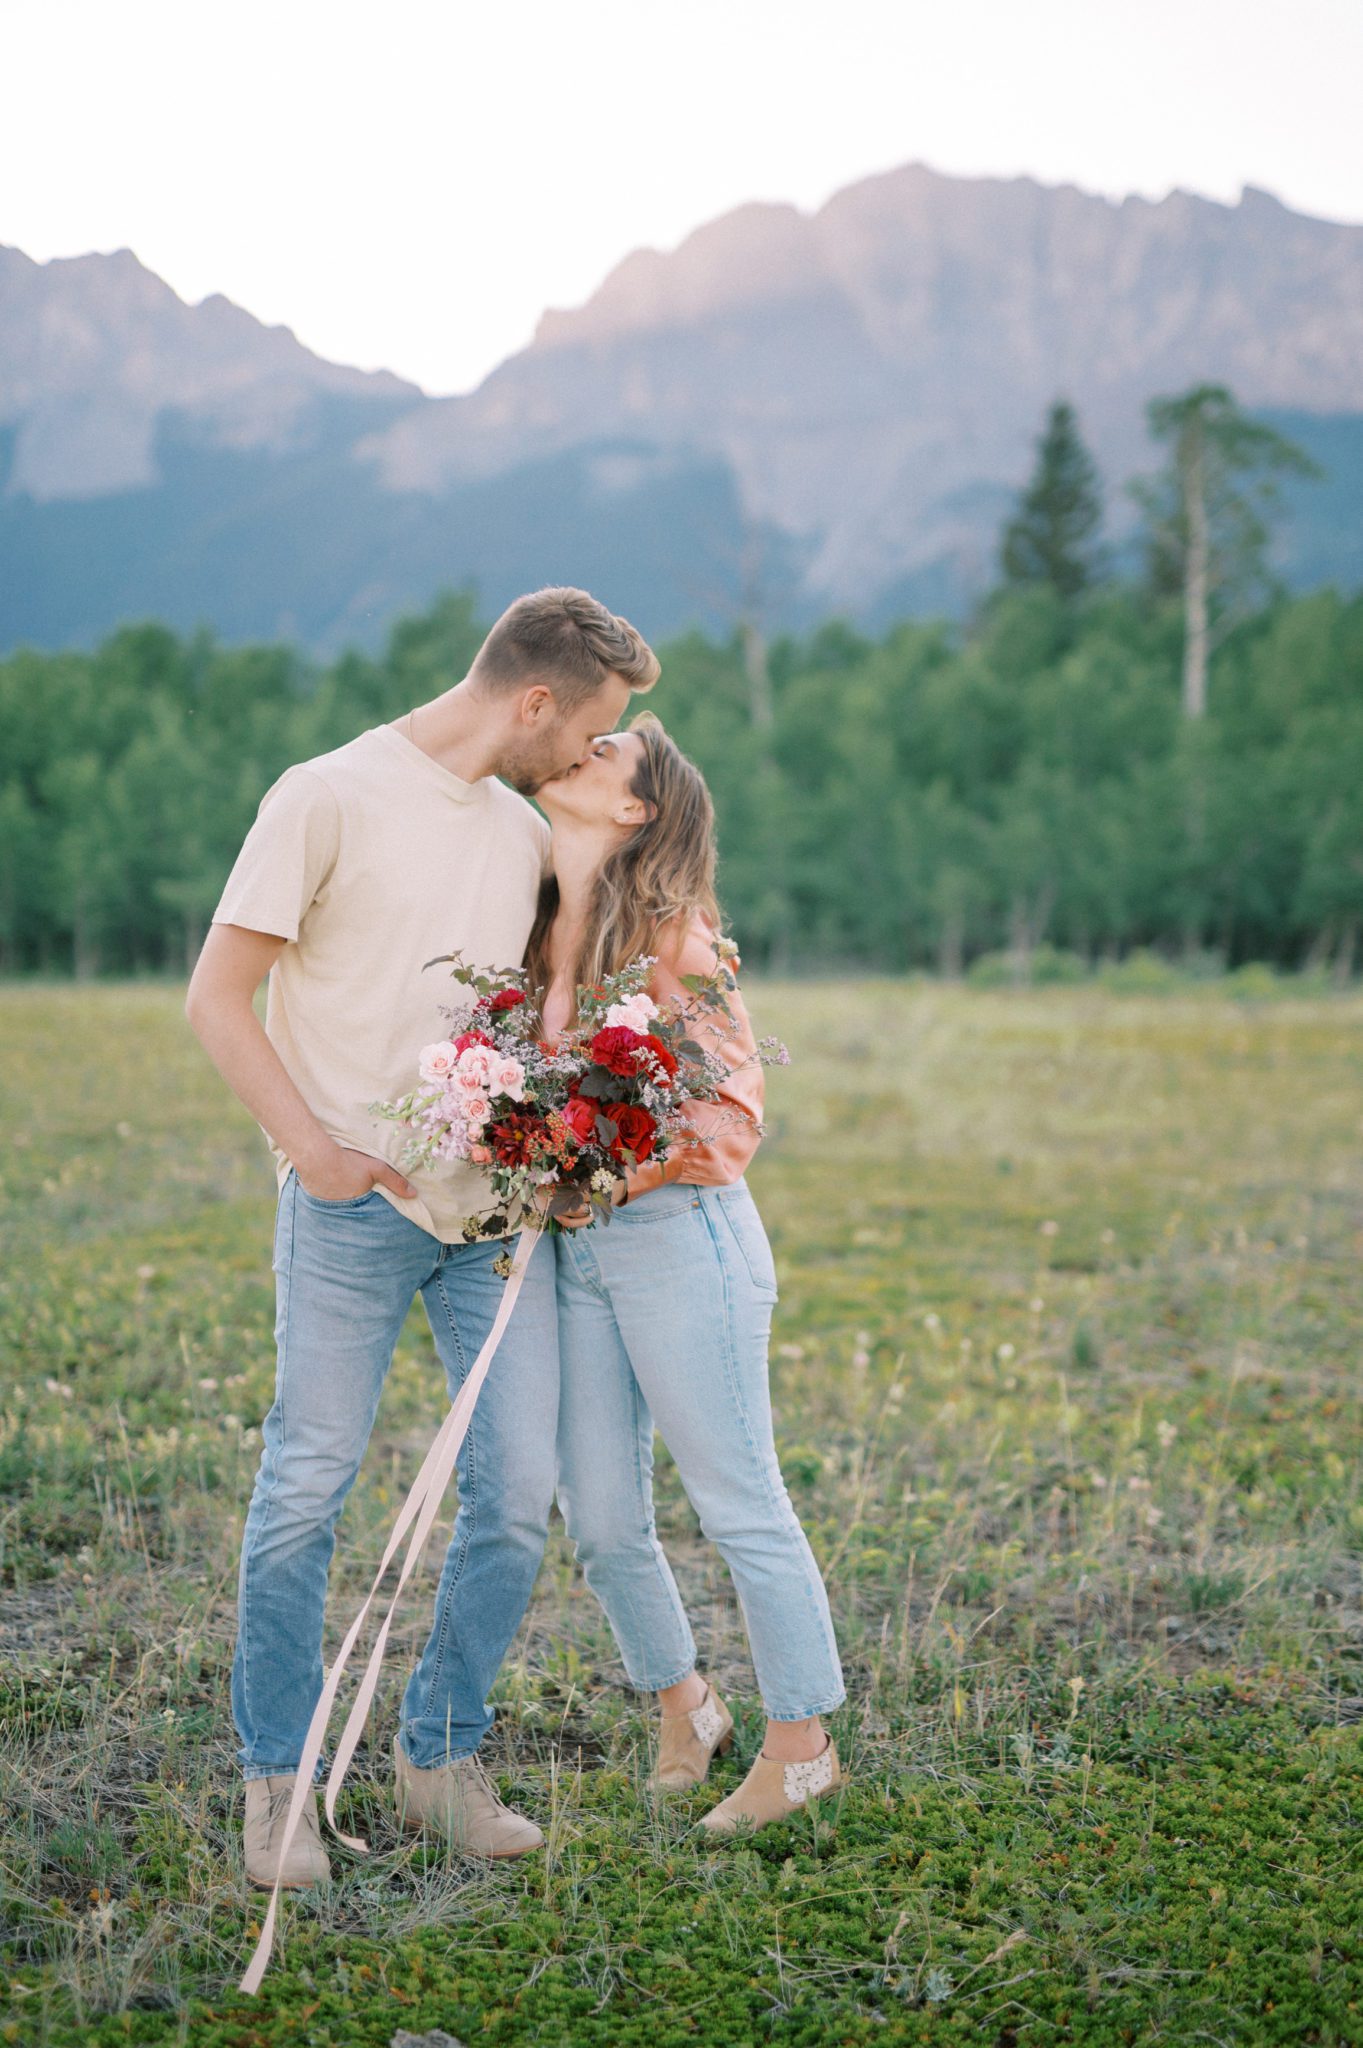 Fresh and fun couples session in the mountains with a vibrant floral bouquet